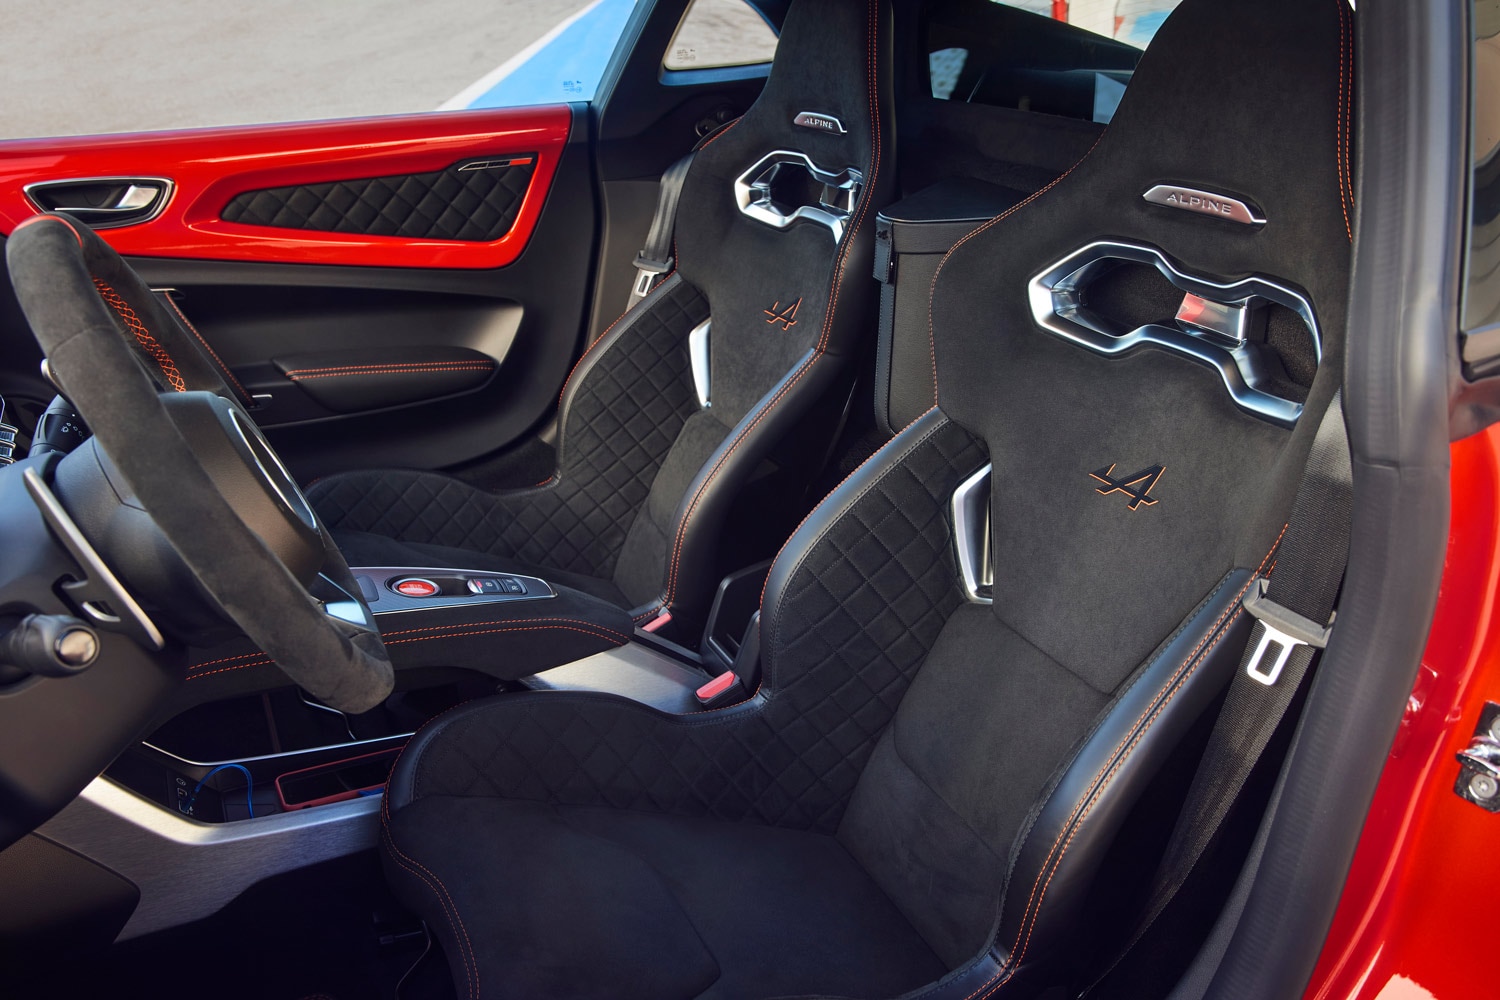 The interior of an Alpine sports car featuring racing seats